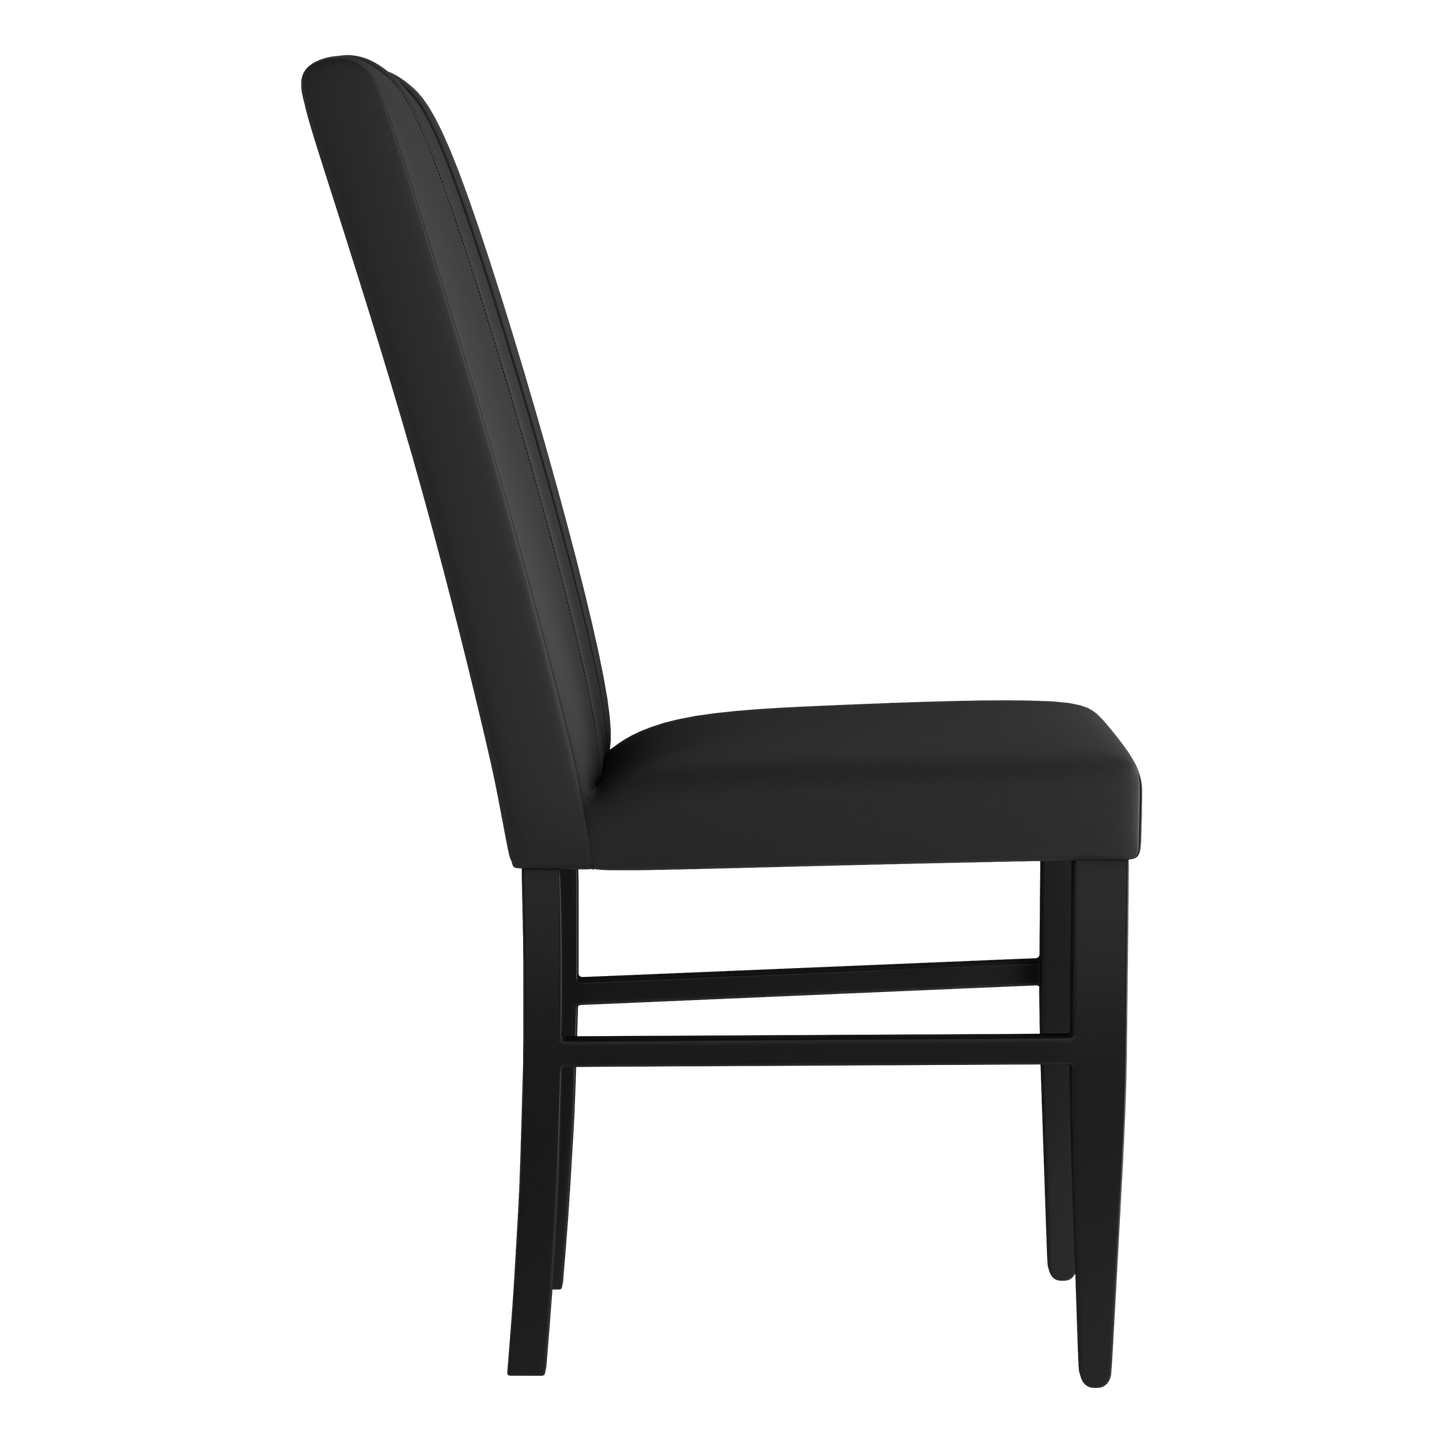 Side Chair 2000 with Inter Miami FC Logo Set of 2